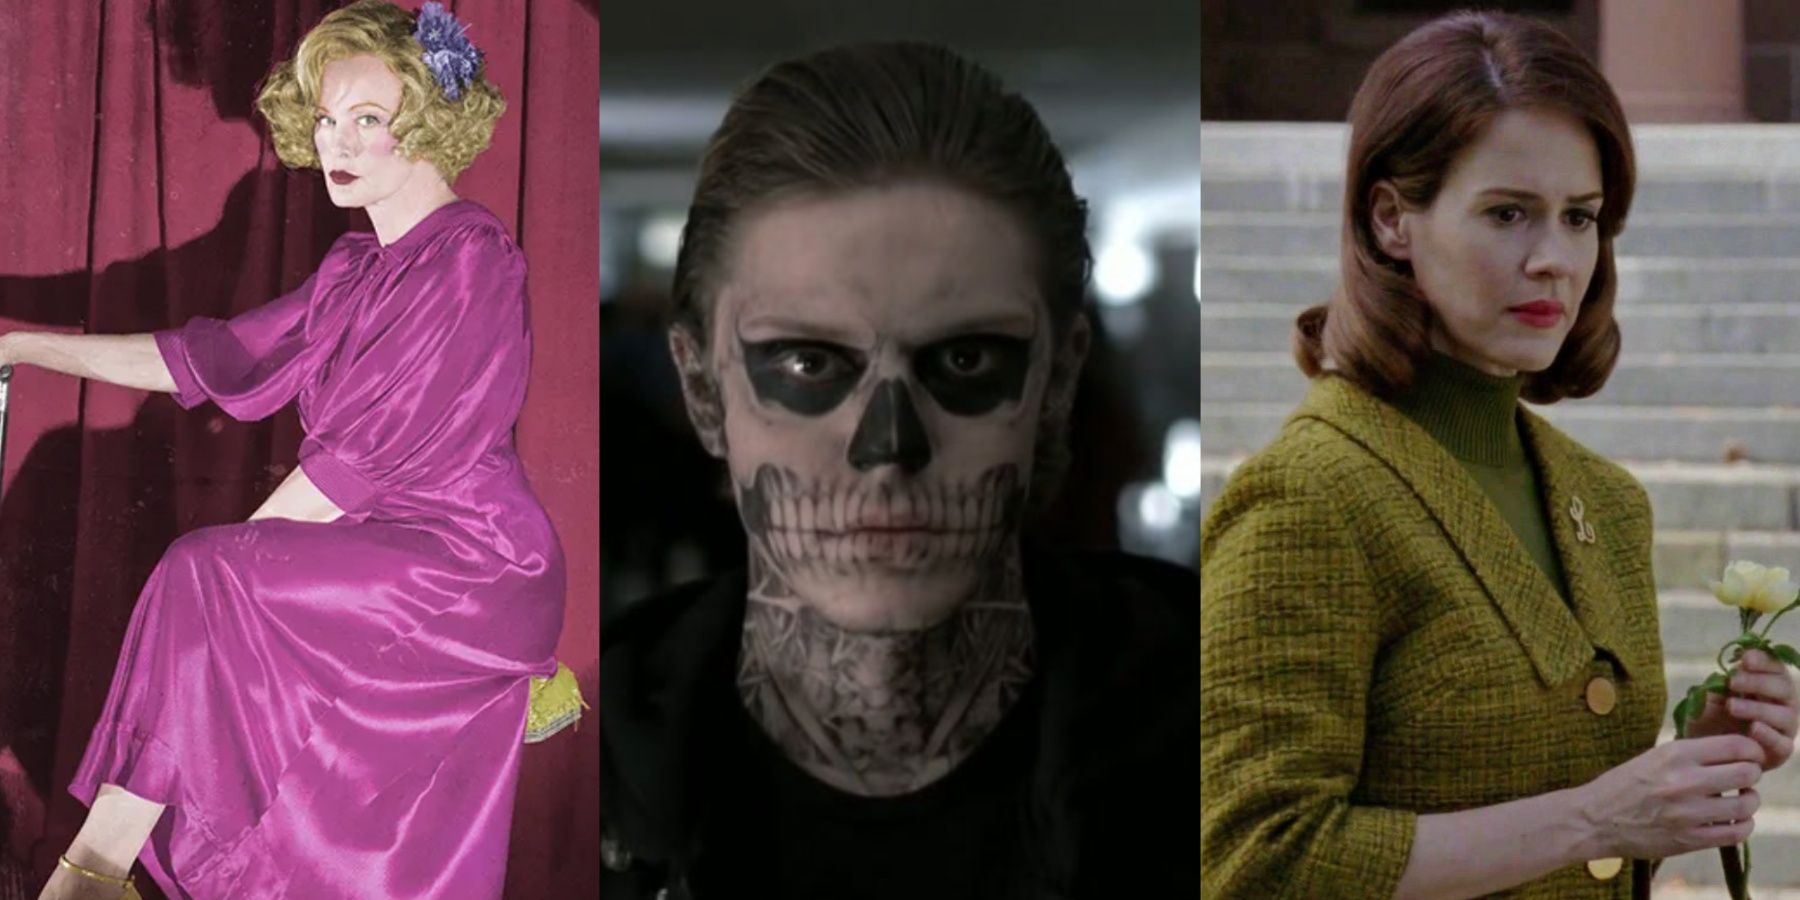 A side by side images of American Horror Story characters including Elsa in Freak Show, Tate in Murder House, and Lana in Asylum